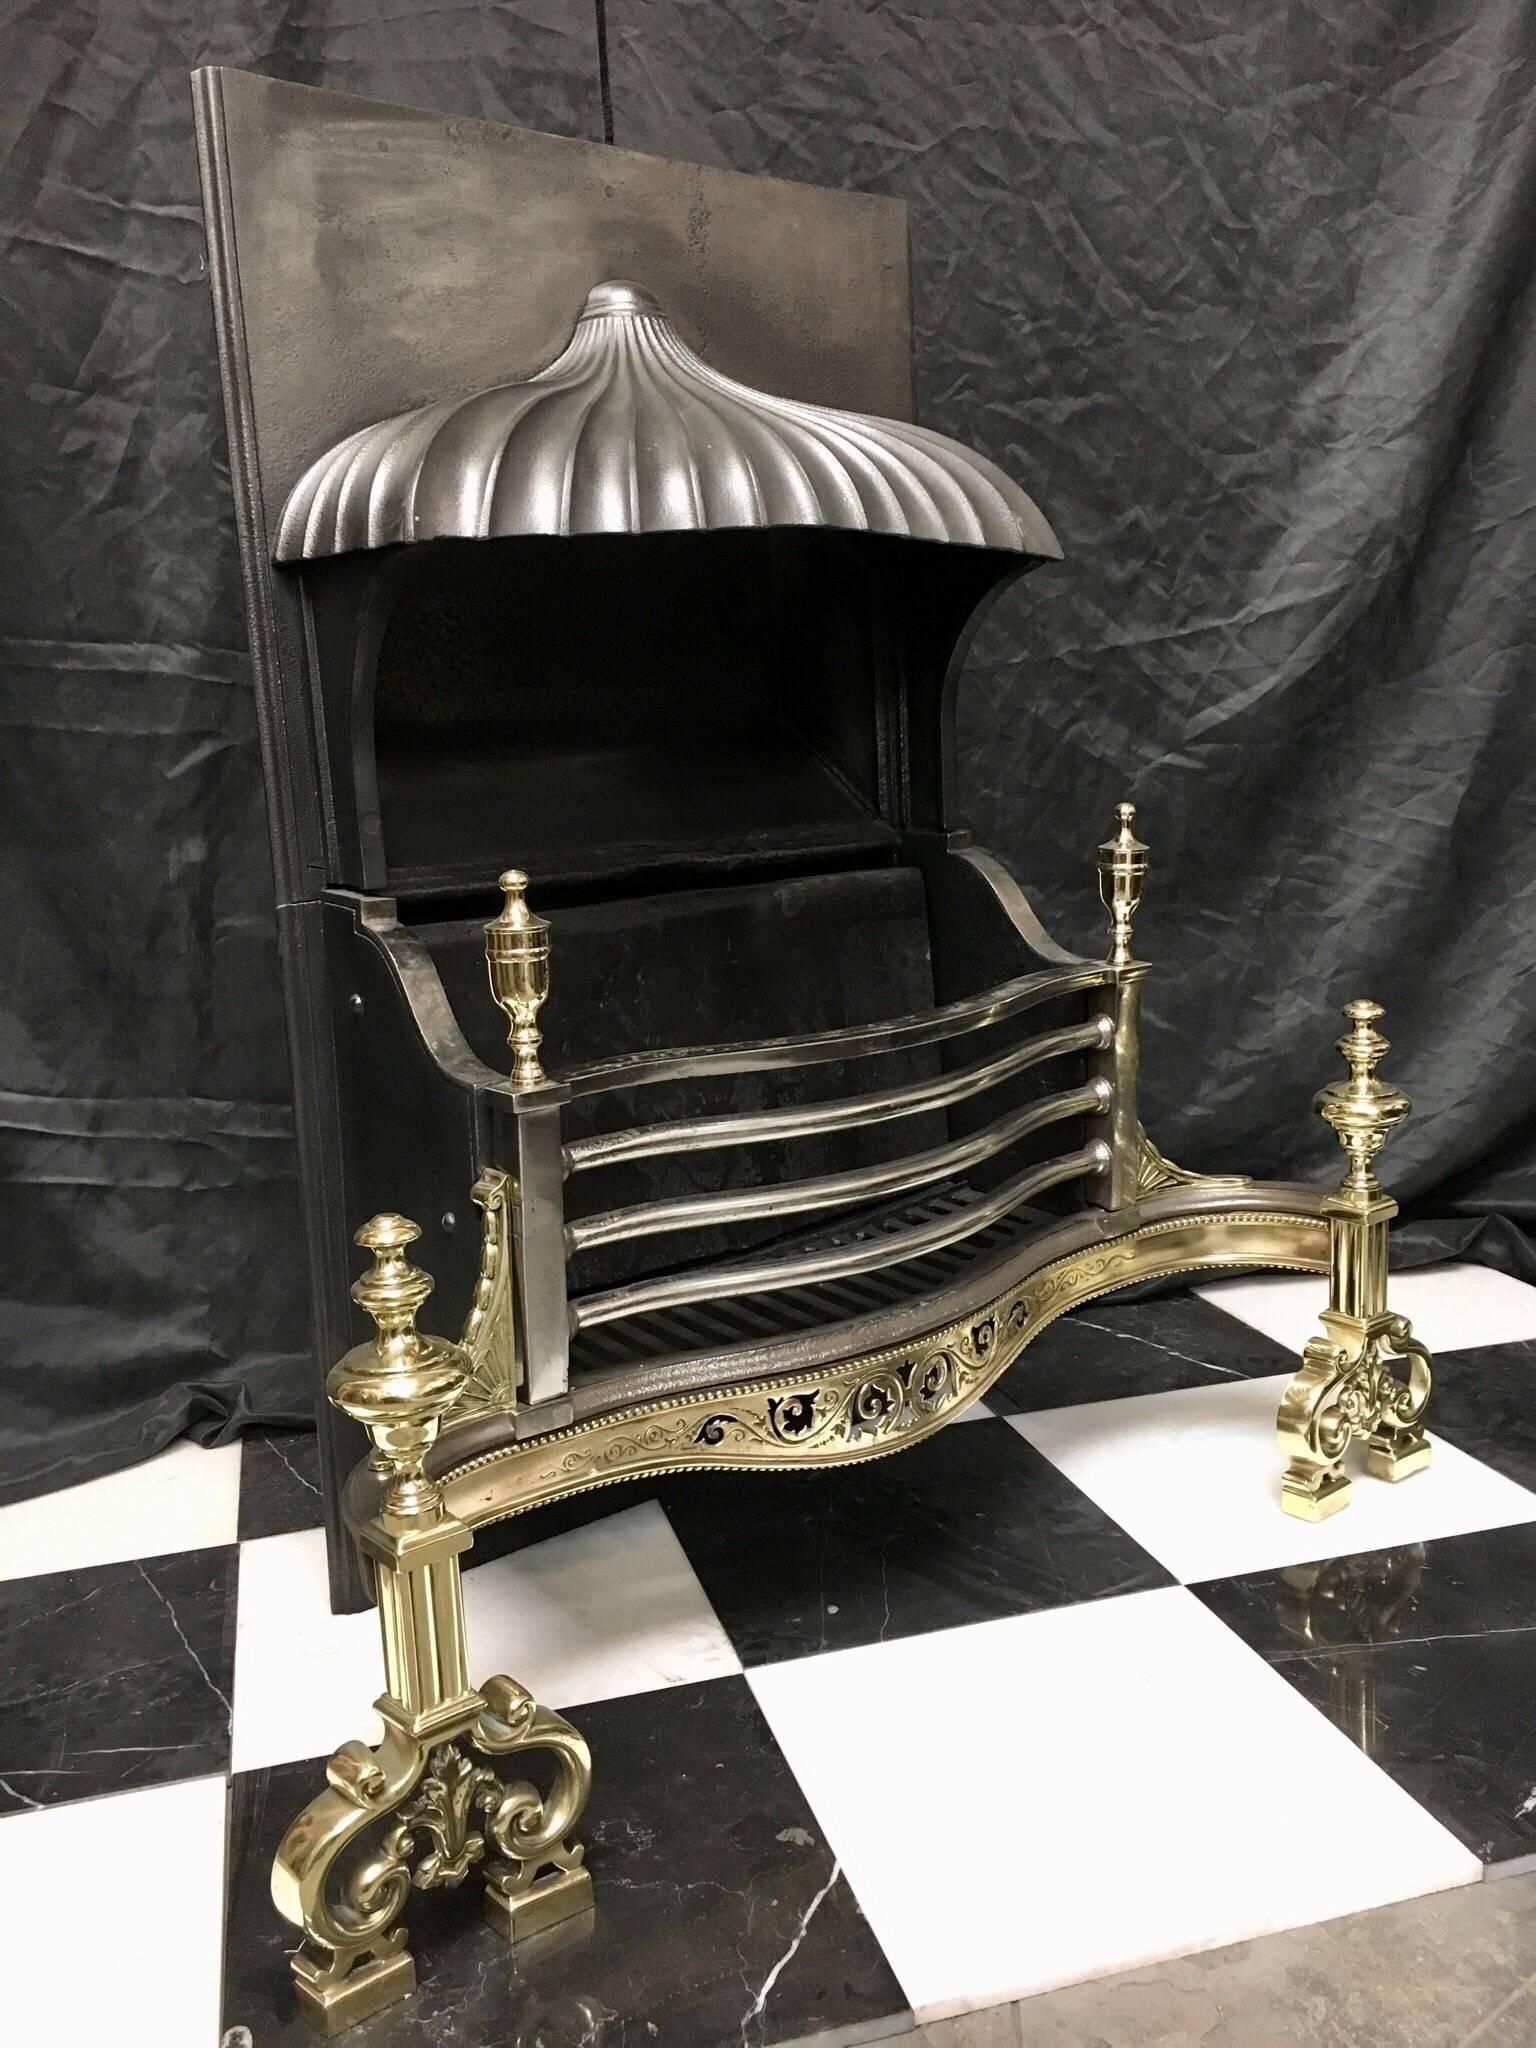 A large inset antique Victorian 19th century hooded neoclassical style cast iron and brass fire grate basket. The polished serpentine four barred grate surmounted by tall brass finials connected by scalloped basket sides supporting a high front with